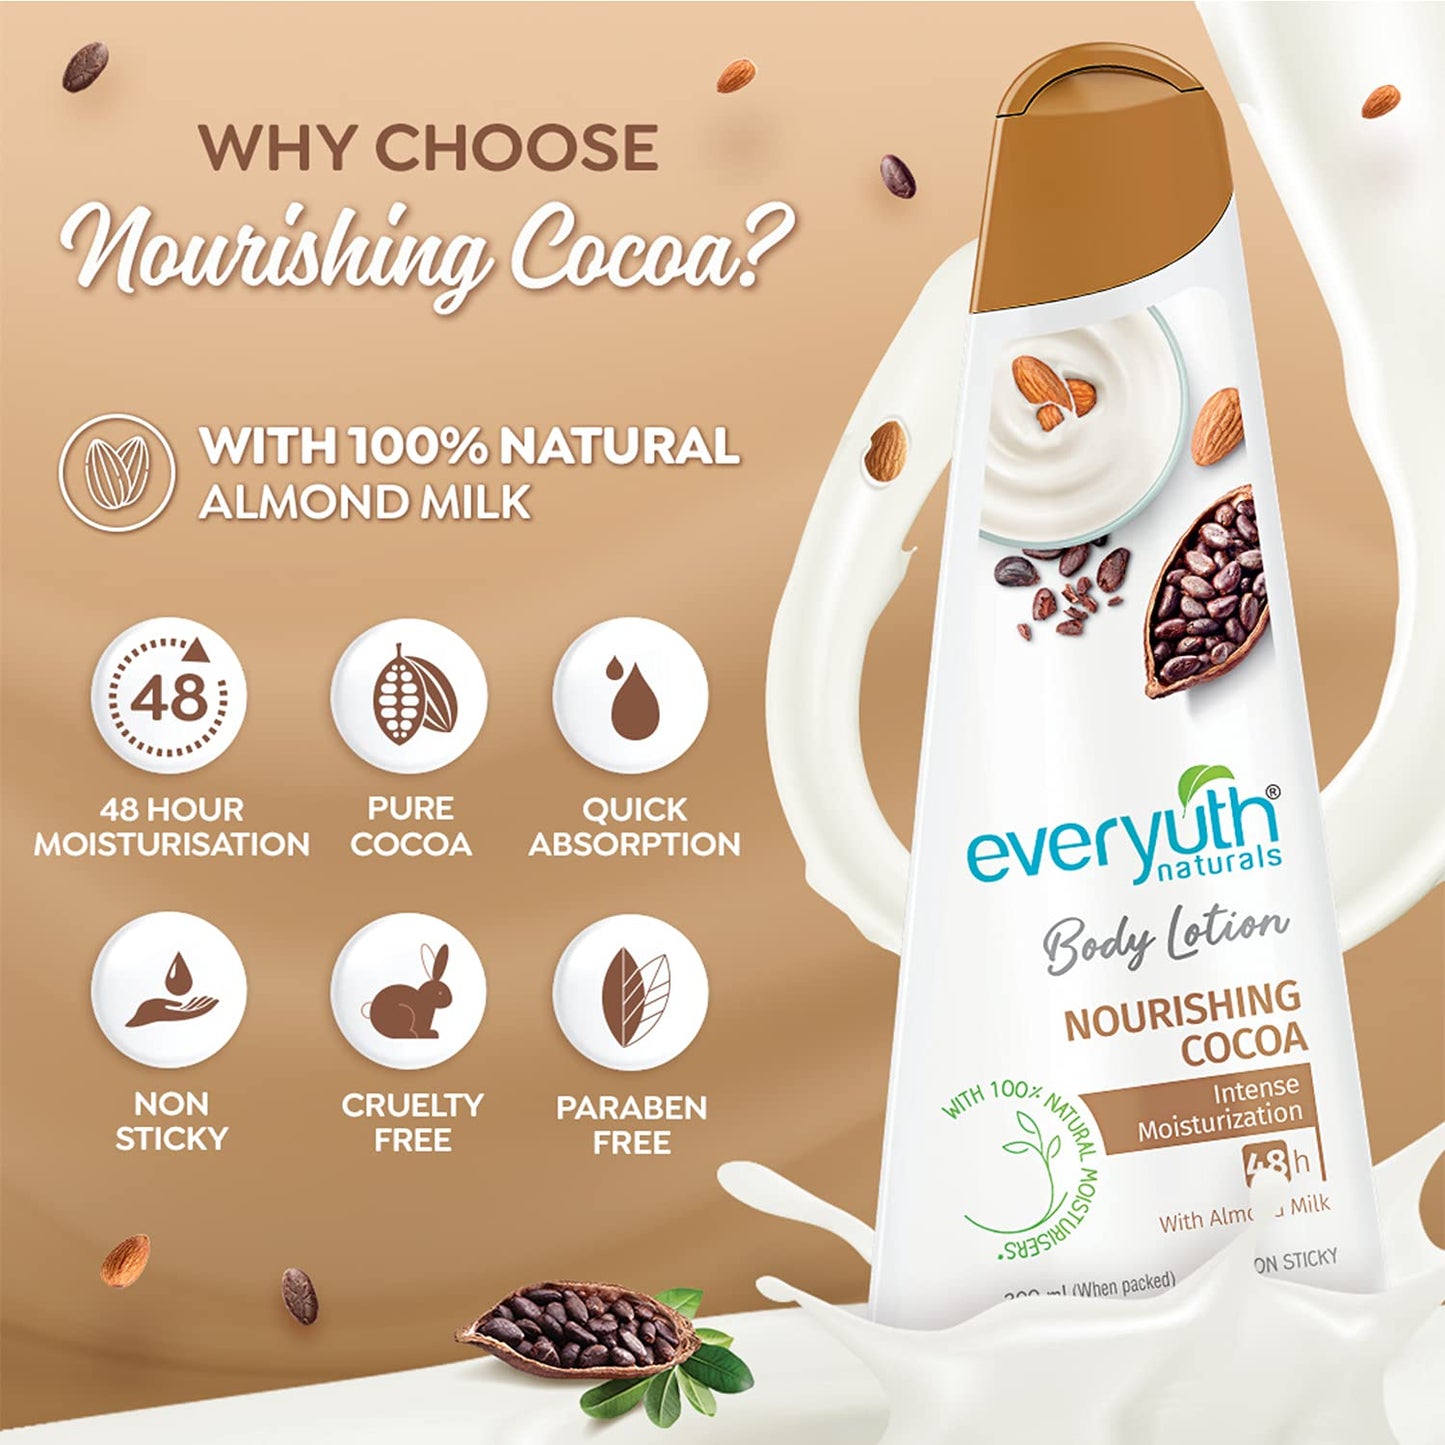 Everyuth Naturals Body Lotion Nourishing Cocoa 100ml Pack Of 3